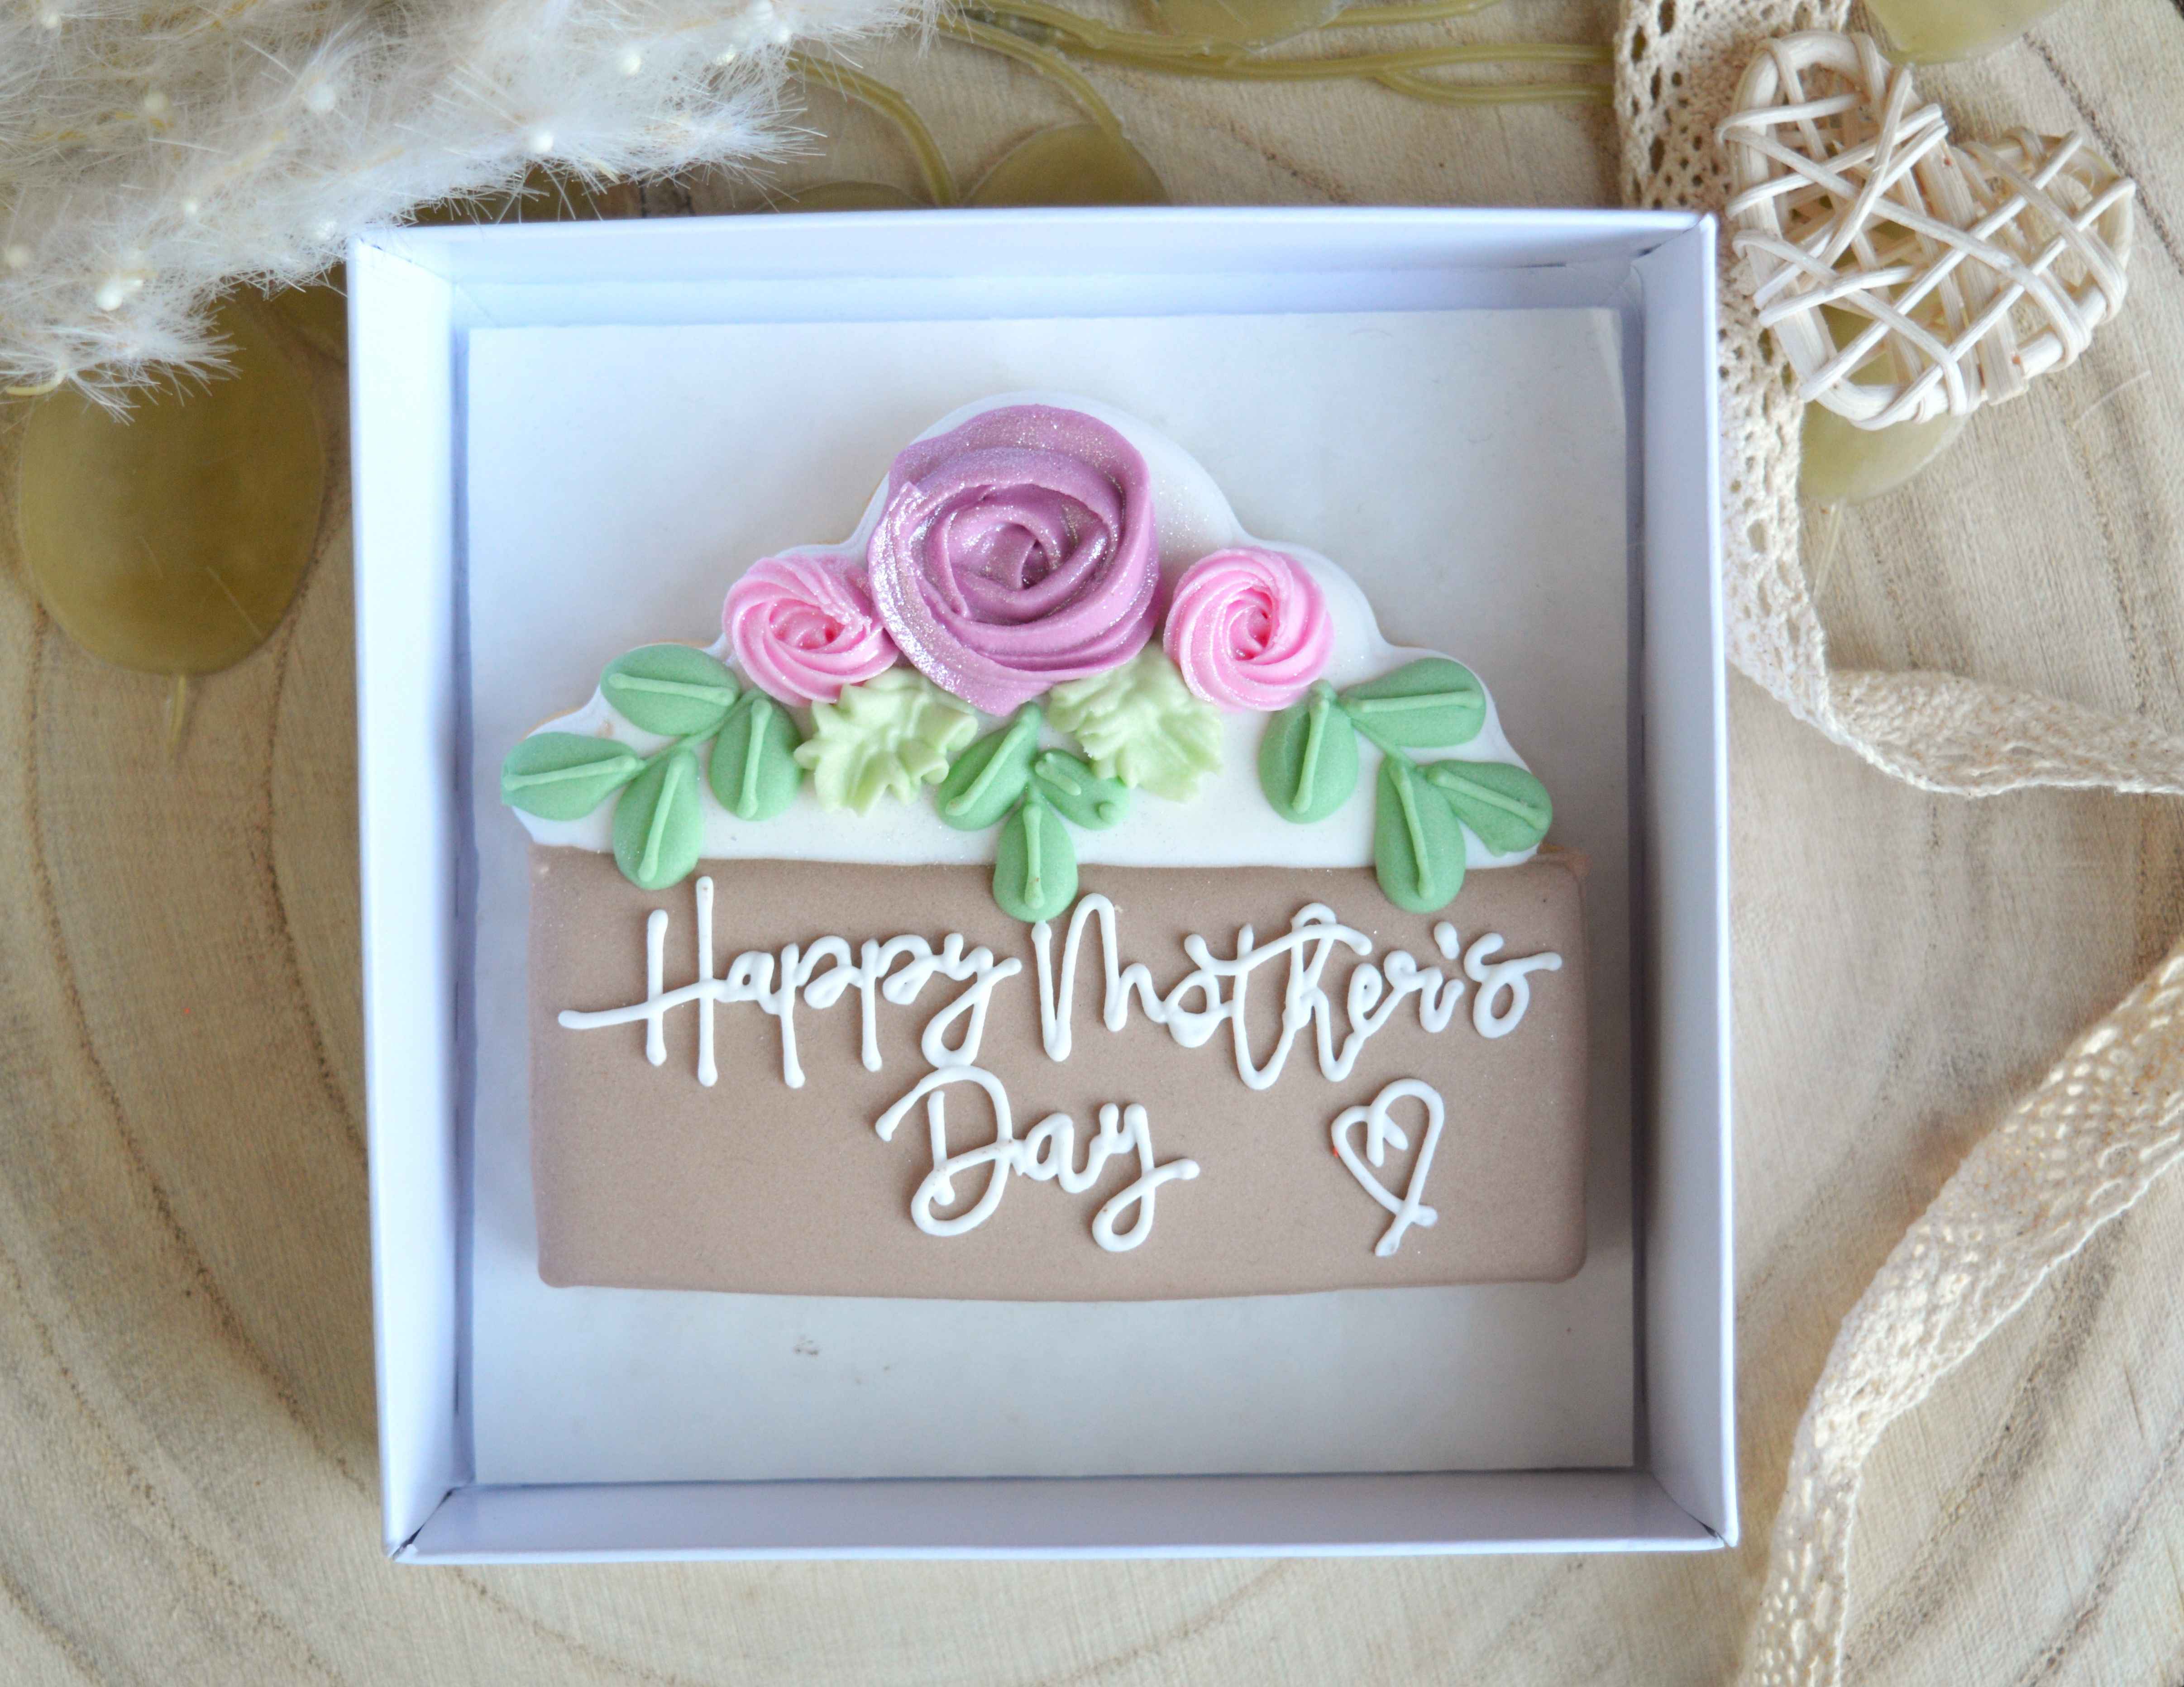 Happy Mother's Day-Mother's Day-Mother's Day Gift-Birthday Gift-Anniversary gift-Thank you gift-Custom made-Cookies-Biscuits-Party Favor